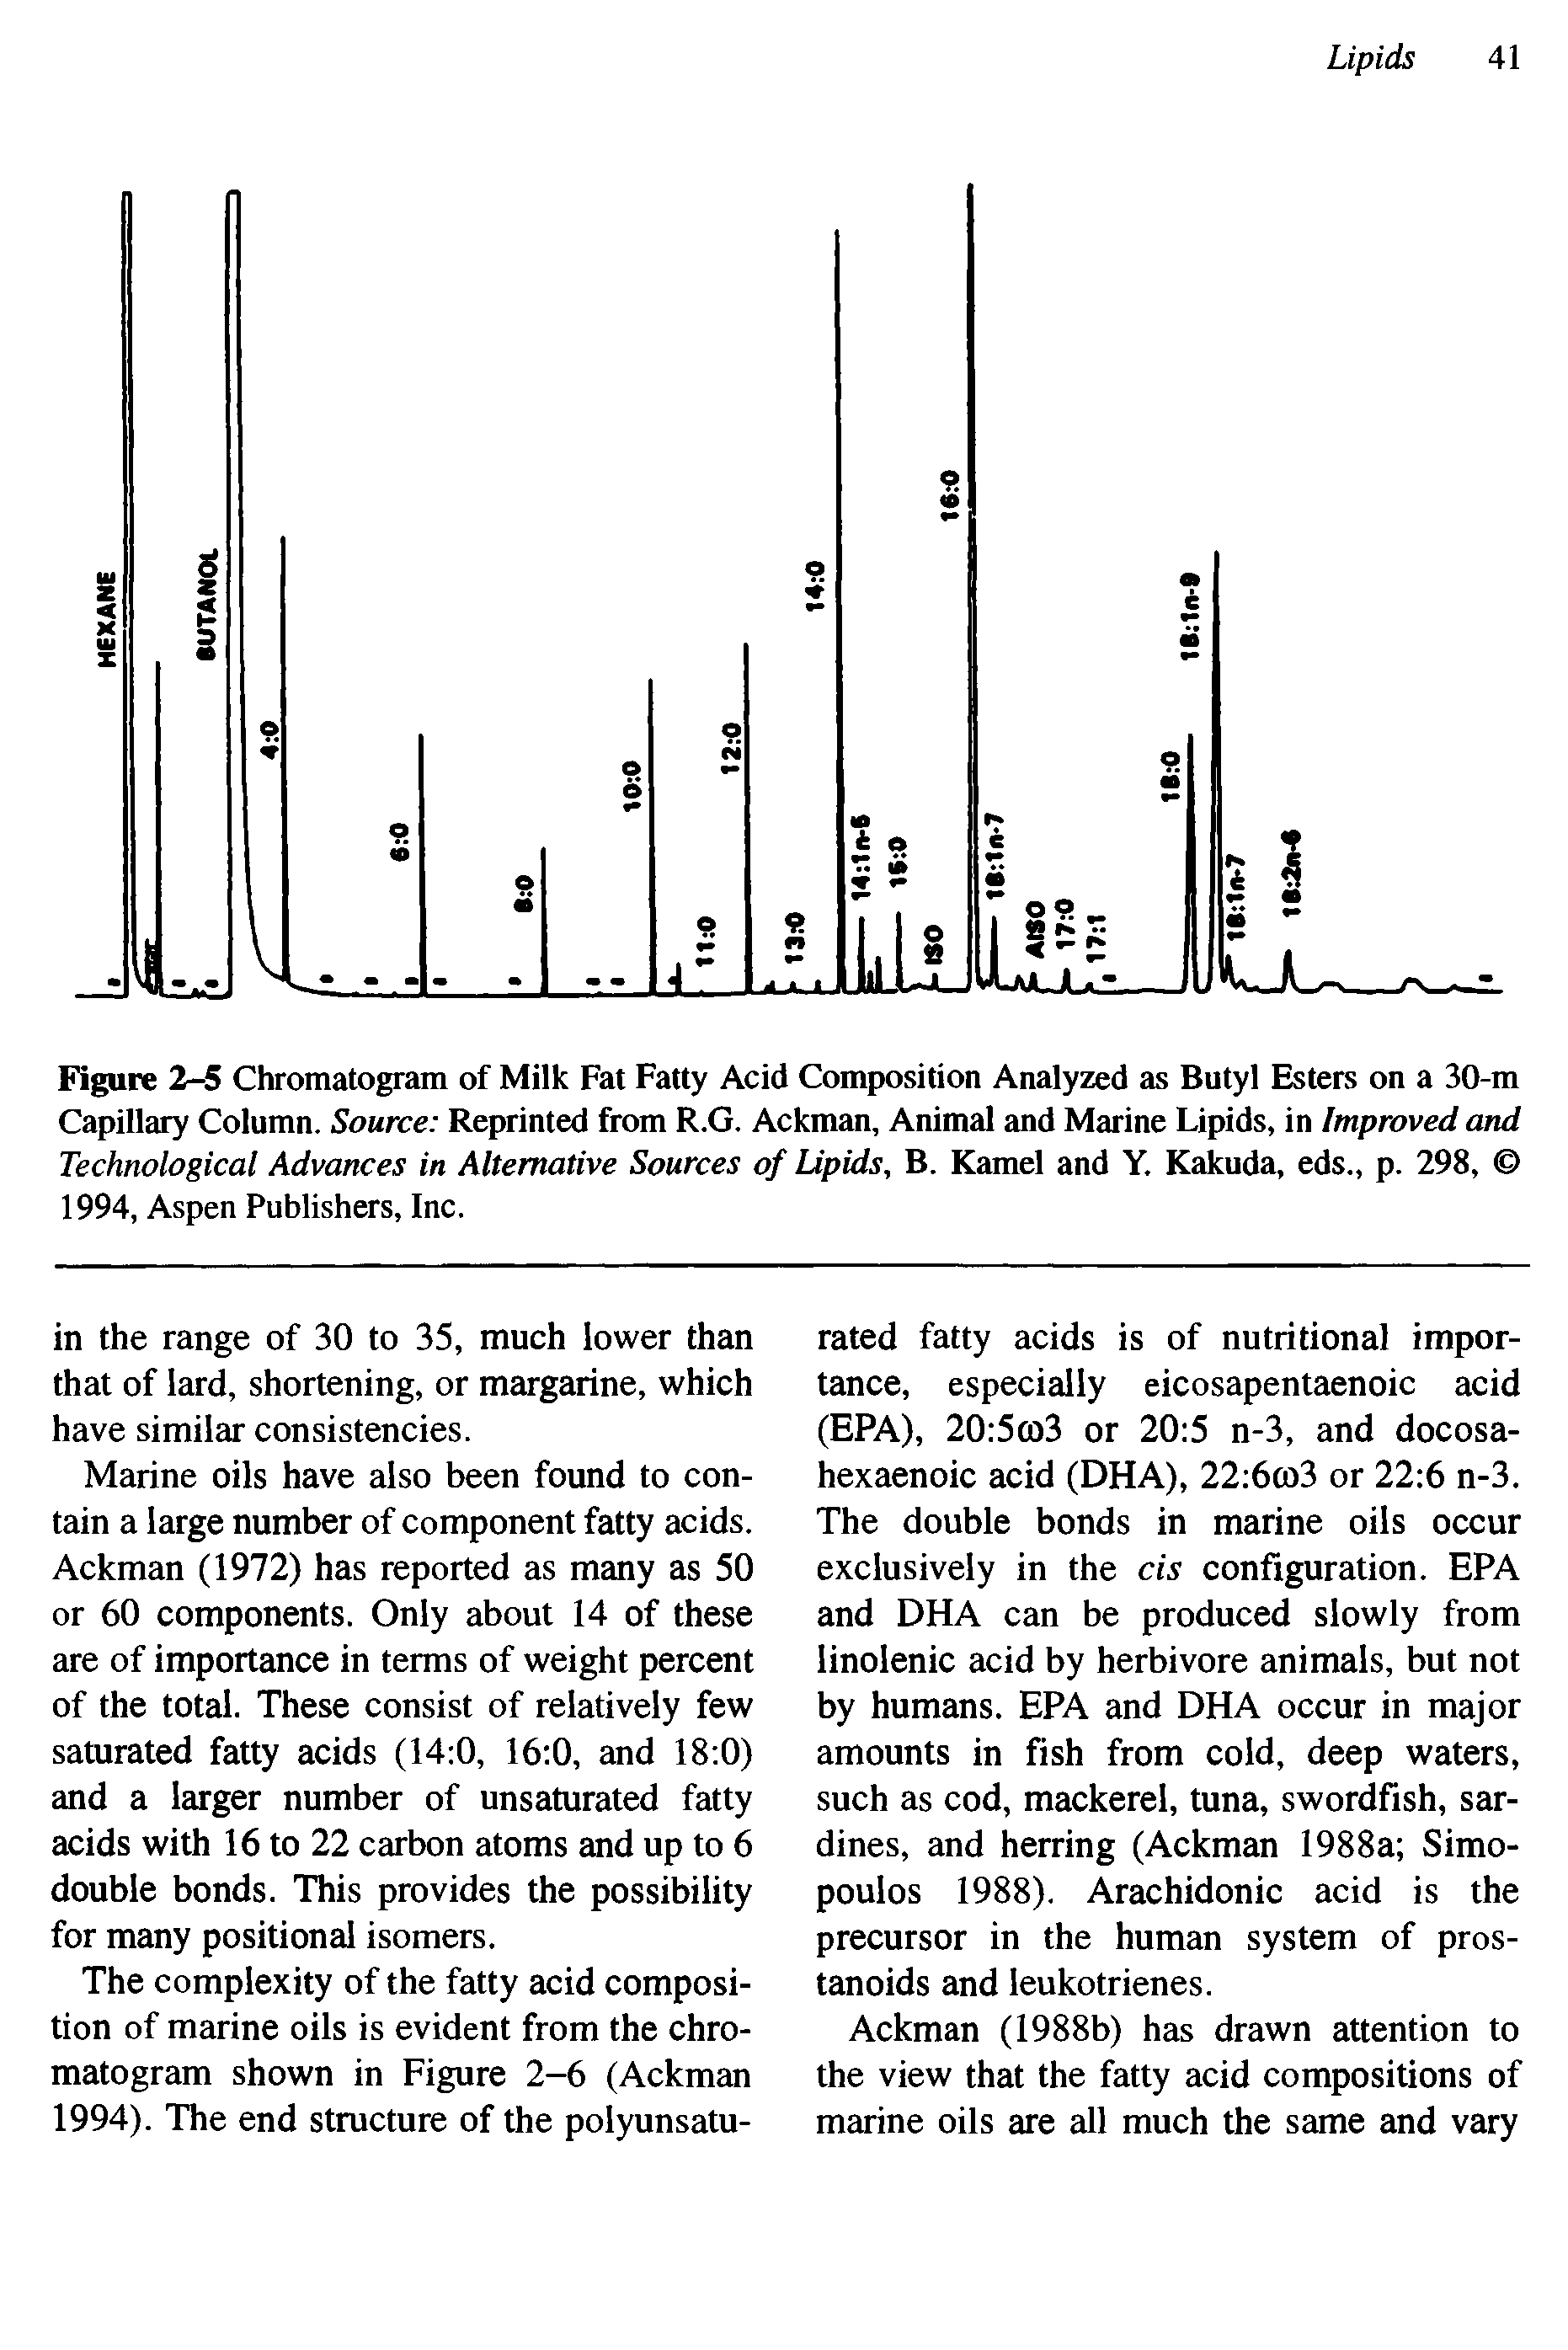 Figure 2-5 Chromatogram of Milk Fat Fatty Acid Composition Analyzed as Butyl Esters on a 30-m Capillary Column. Source Reprinted from R.G. Ackman, Animal and Marine Lipids, in Improved and Technological Advances in Alternative Sources of Lipids, B. Kamel and Y. Kakuda, eds., p. 298, 1994, Aspen Publishers, Inc.